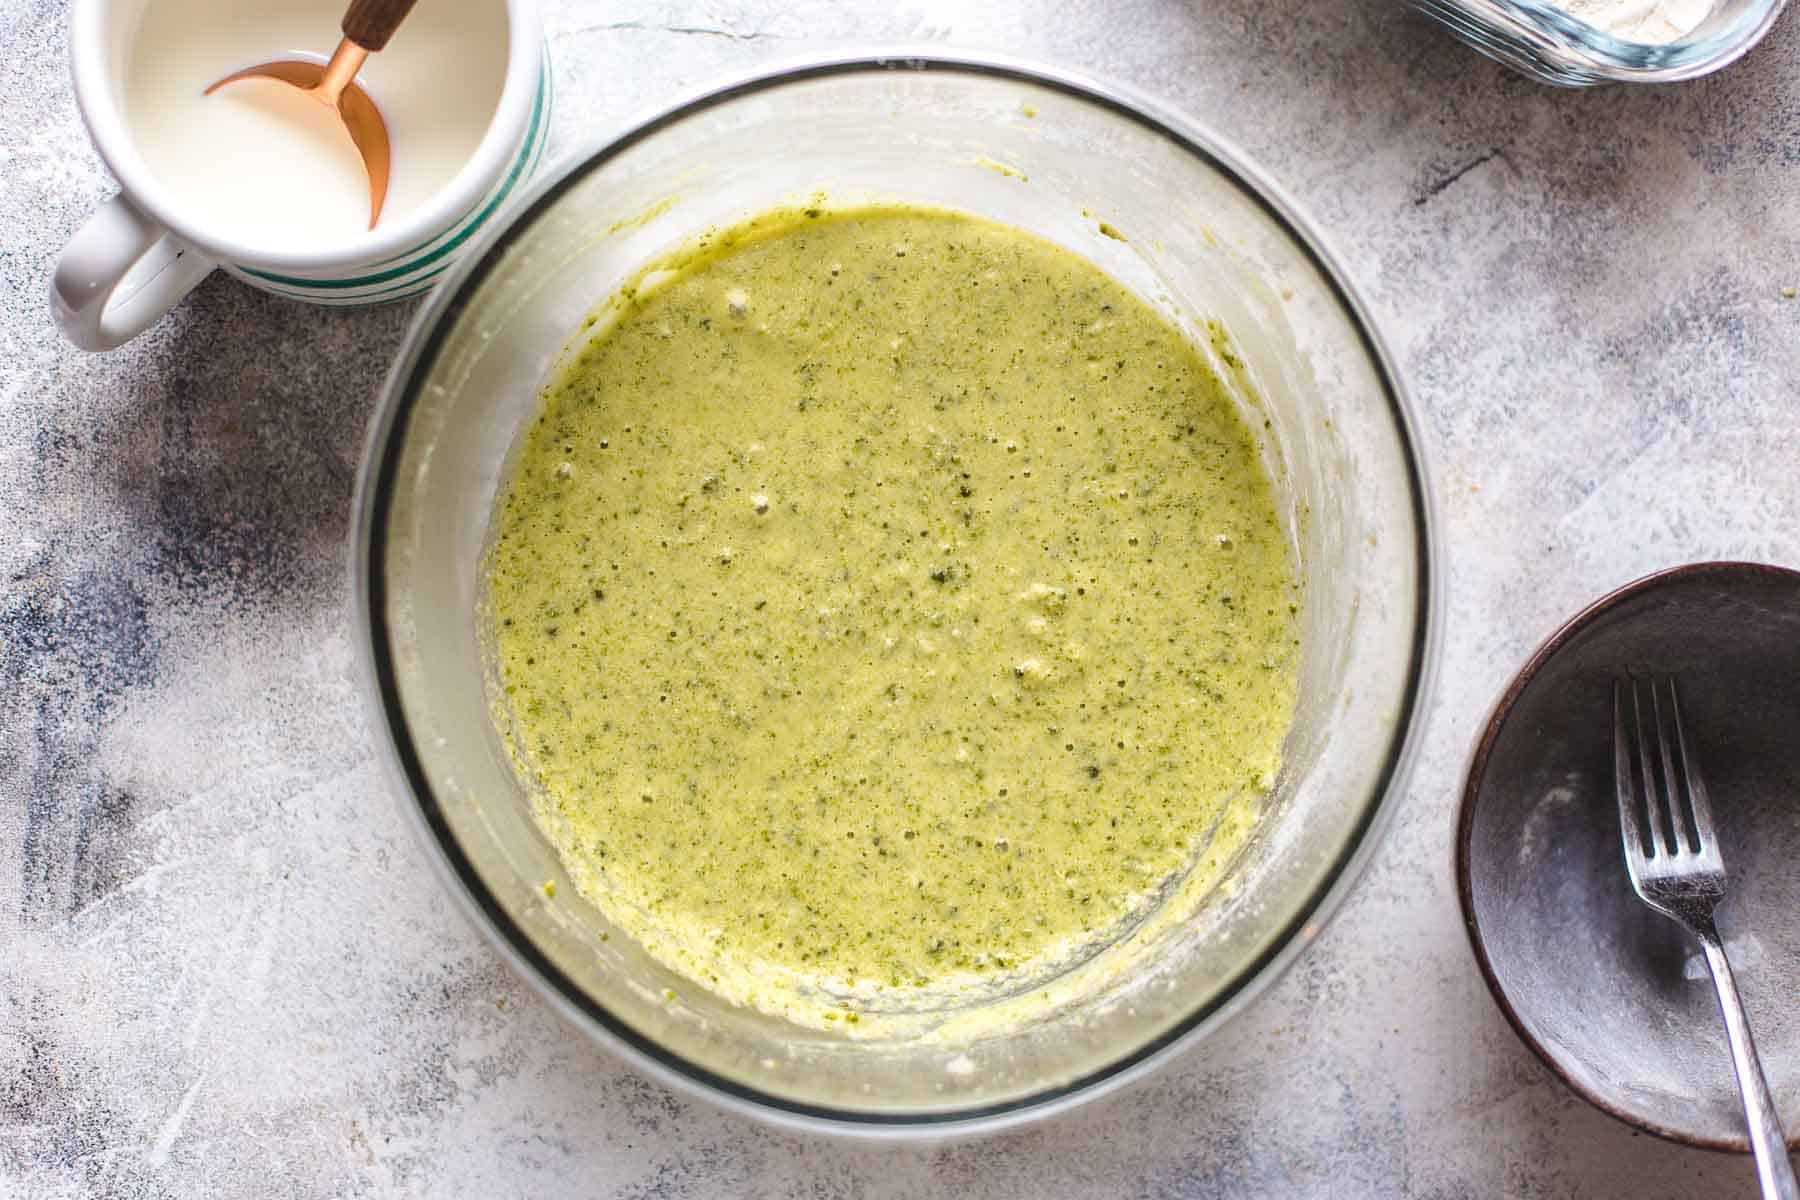 mixed pistachio cake batter in a bowl